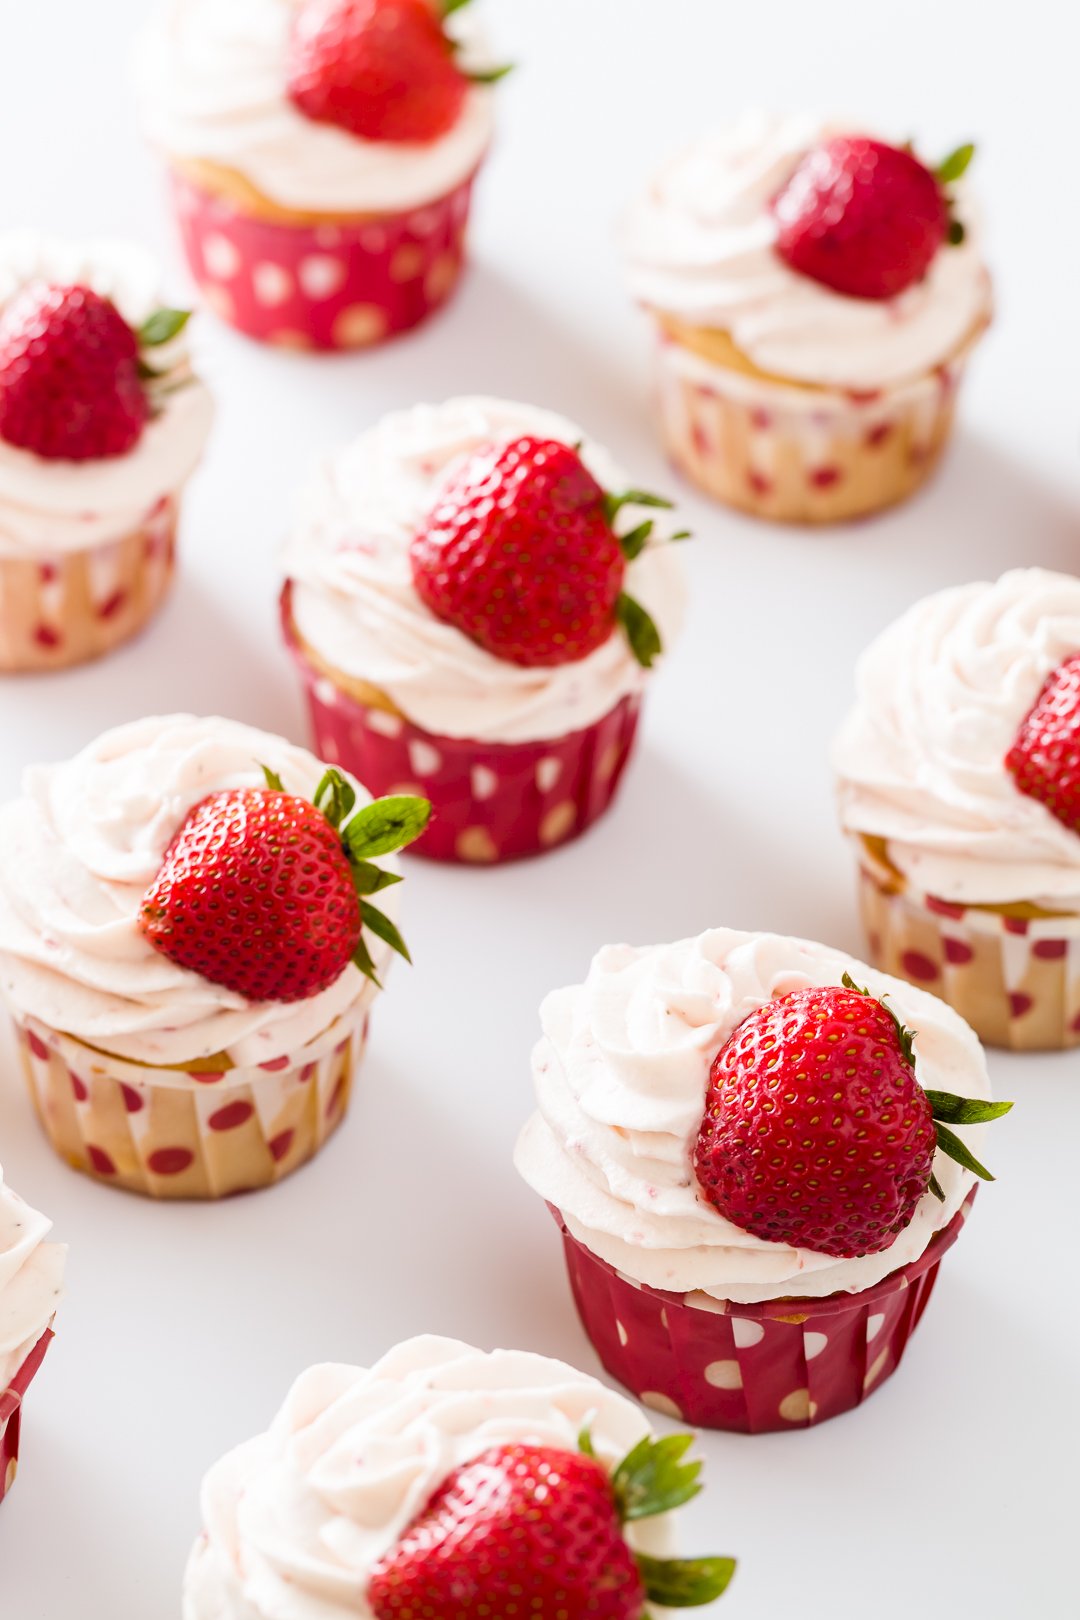 Vanilla Cupcakes with Strawberry Whipped Cream Frosting | Cupcake Project